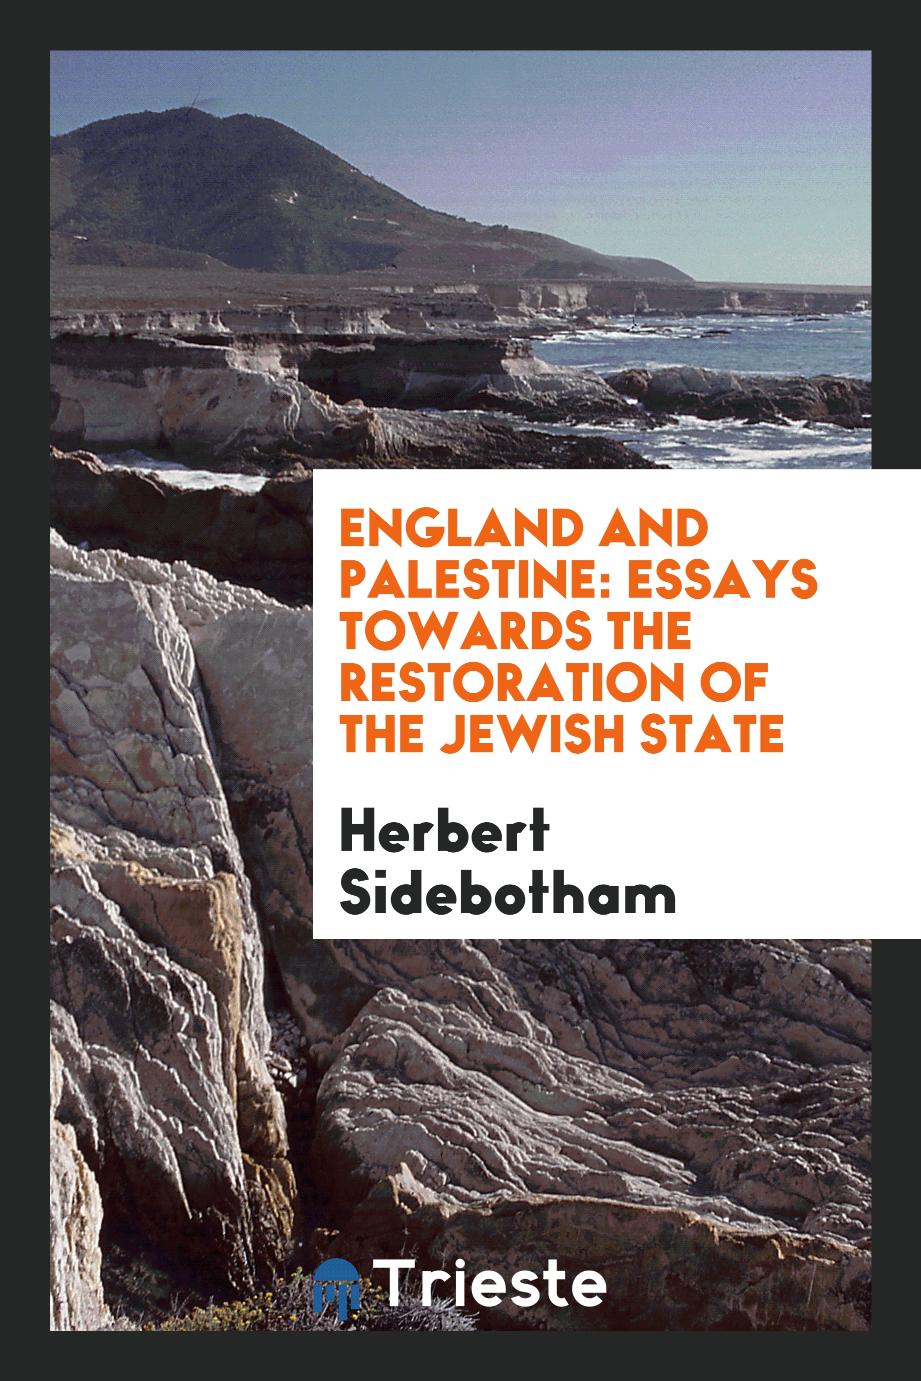 England and Palestine: essays towards the restoration of the Jewish state